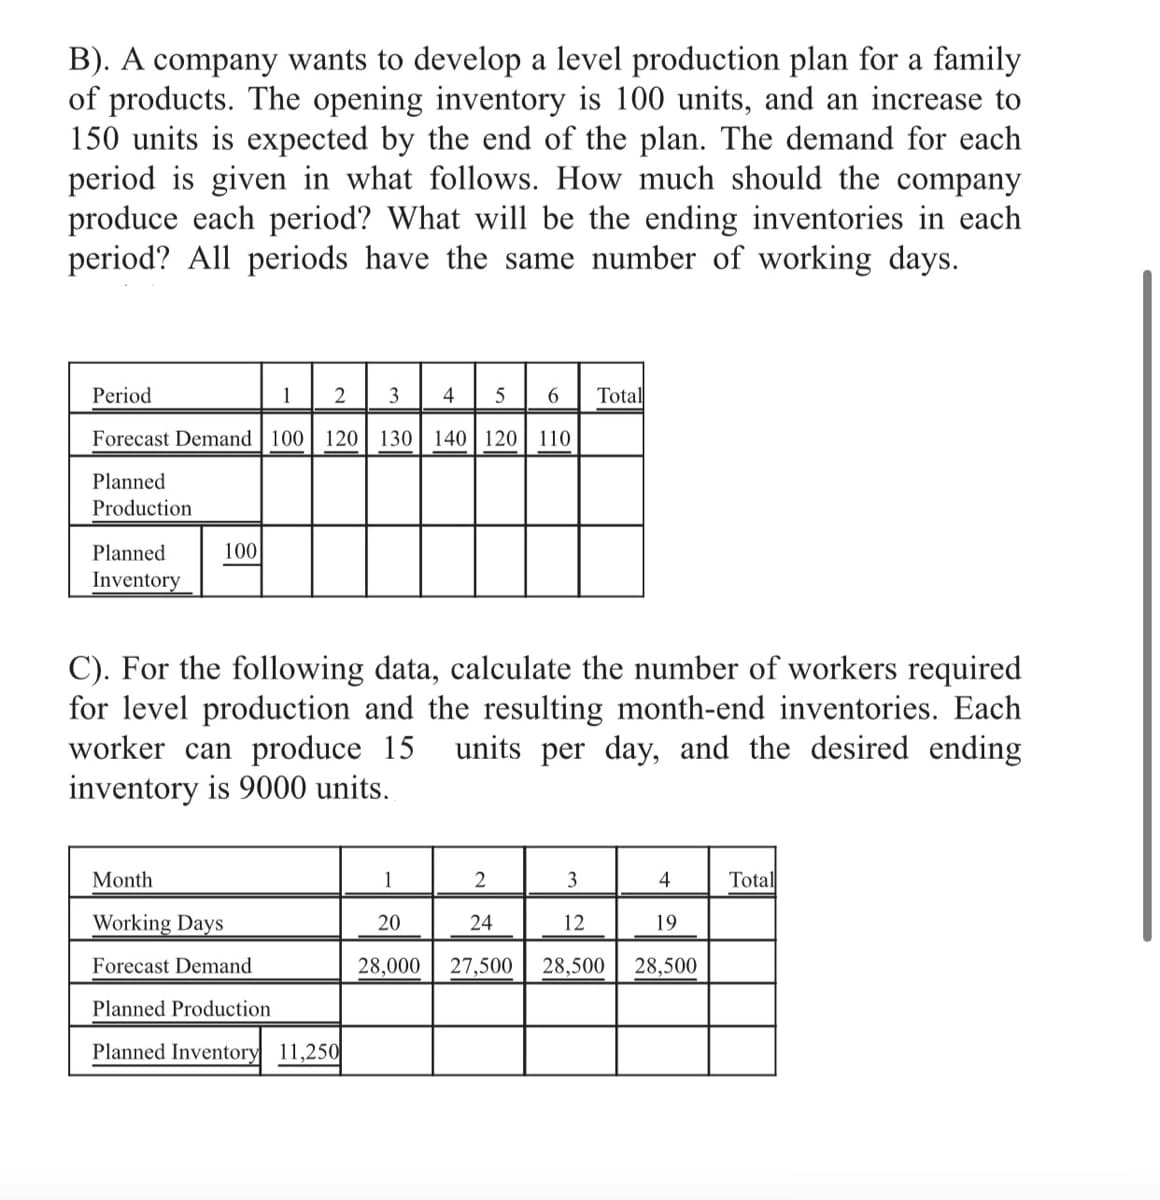 B). A company wants to develop a level production plan for a family
of products. The opening inventory is 100 units, and an increase to
150 units is expected by the end of the plan. The demand for each
period is given in what follows. How much should the company
produce each period? What will be the ending inventories in each
period? All periods have the same number of working days.
Period
1
4
6.
Total
Forecast Demand | 100
120| 130
140 120 | 110
Planned
Production
Planned
100
Inventory
C). For the following data, calculate the number of workers required
for level production and the resulting month-end inventories. Each
worker can produce 15
inventory is 9000 units.
units per day, and the desired ending
Month
1
2
3
4
Total
Working Days
20
24
12
19
Forecast Demand
28,000
27,500
28,500
28,500
Planned Production
Planned Inventory 11,250
